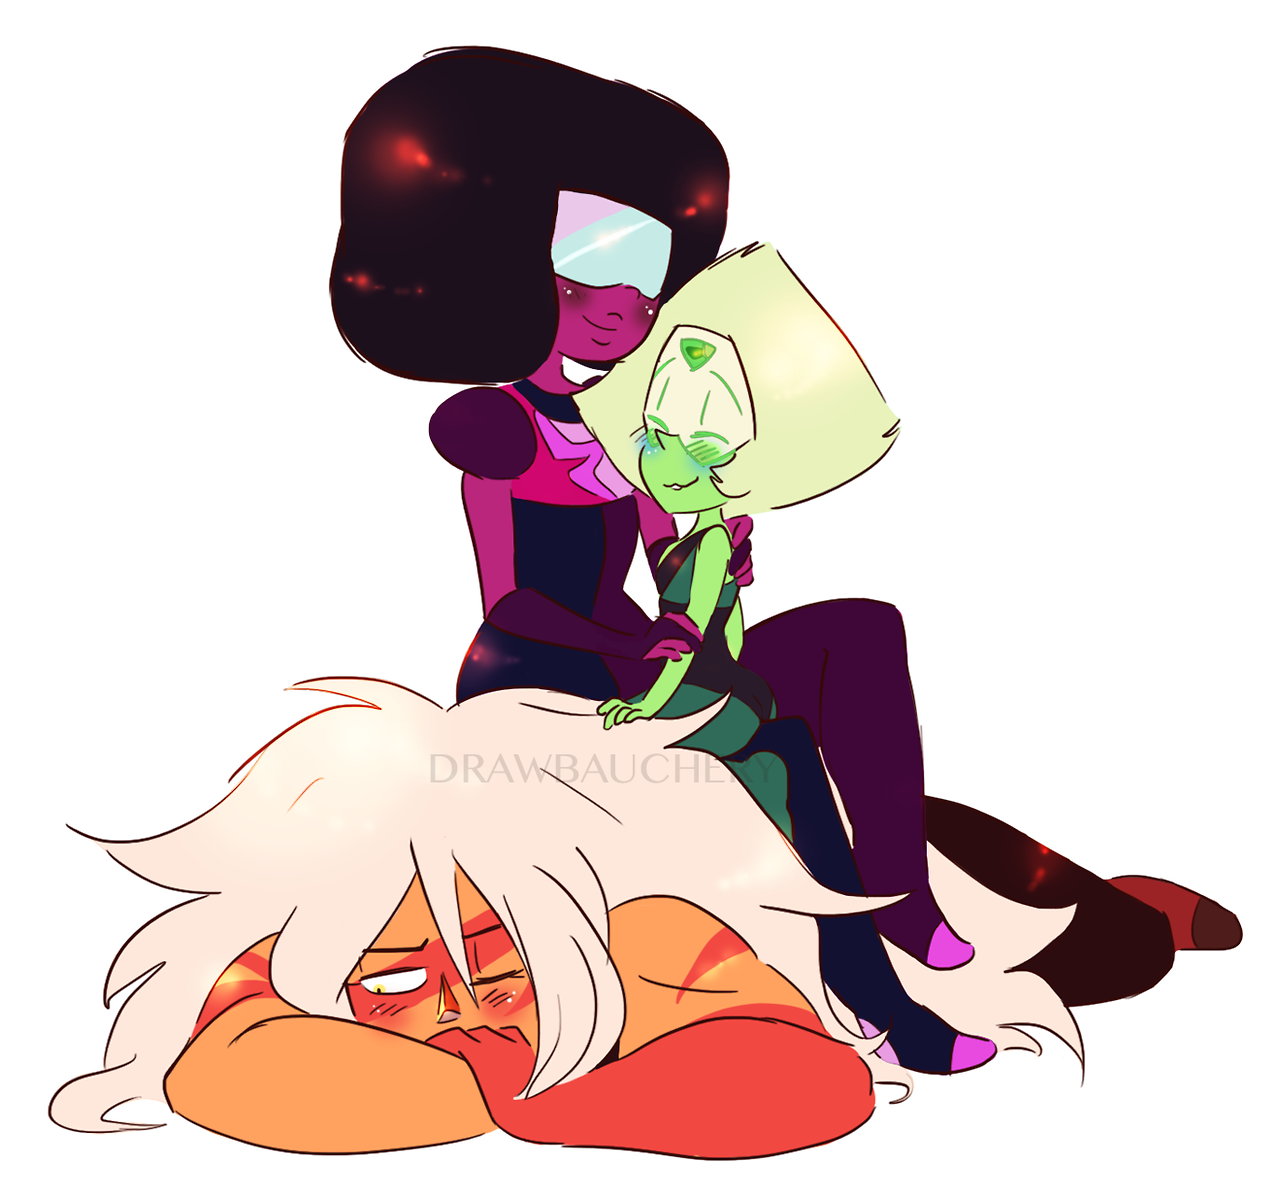 ishipthisthreesometoowhoopsstop saying foursome, garnet is literally one person